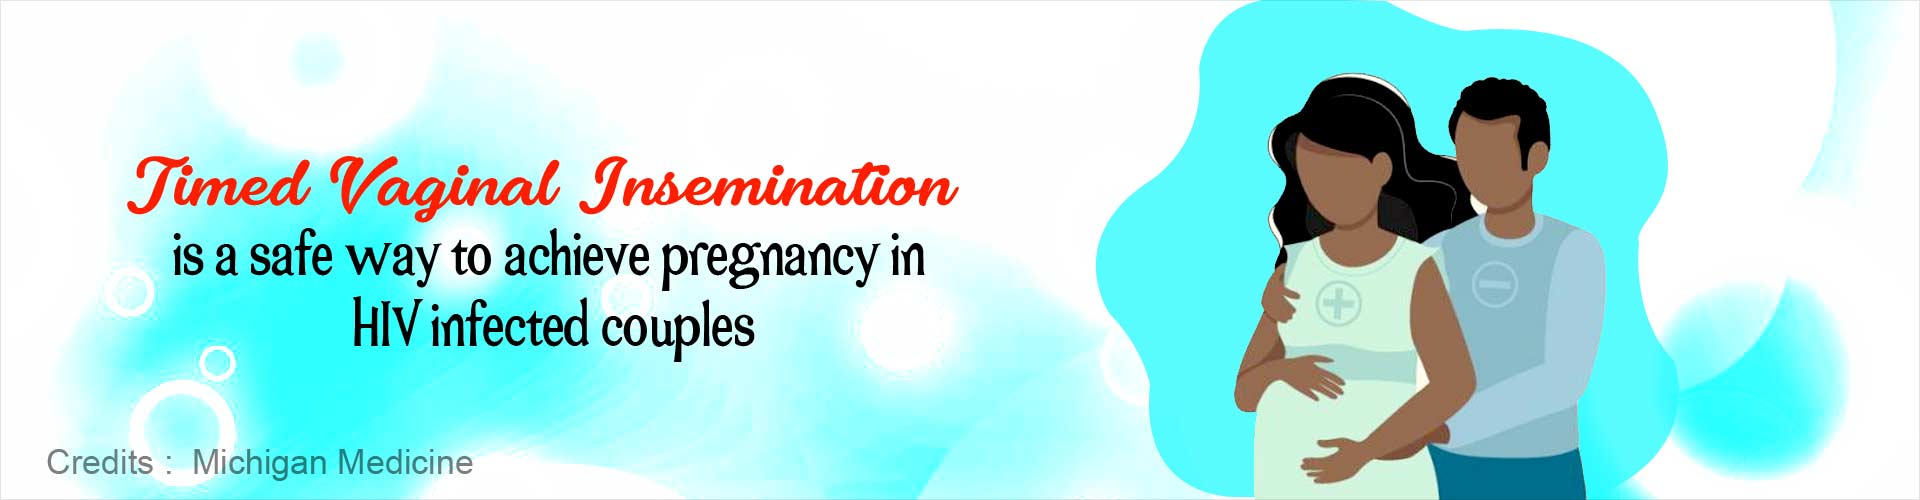 Timed vaginal insemination is a safe way to achieve pregnancy in HIV infected couples. 